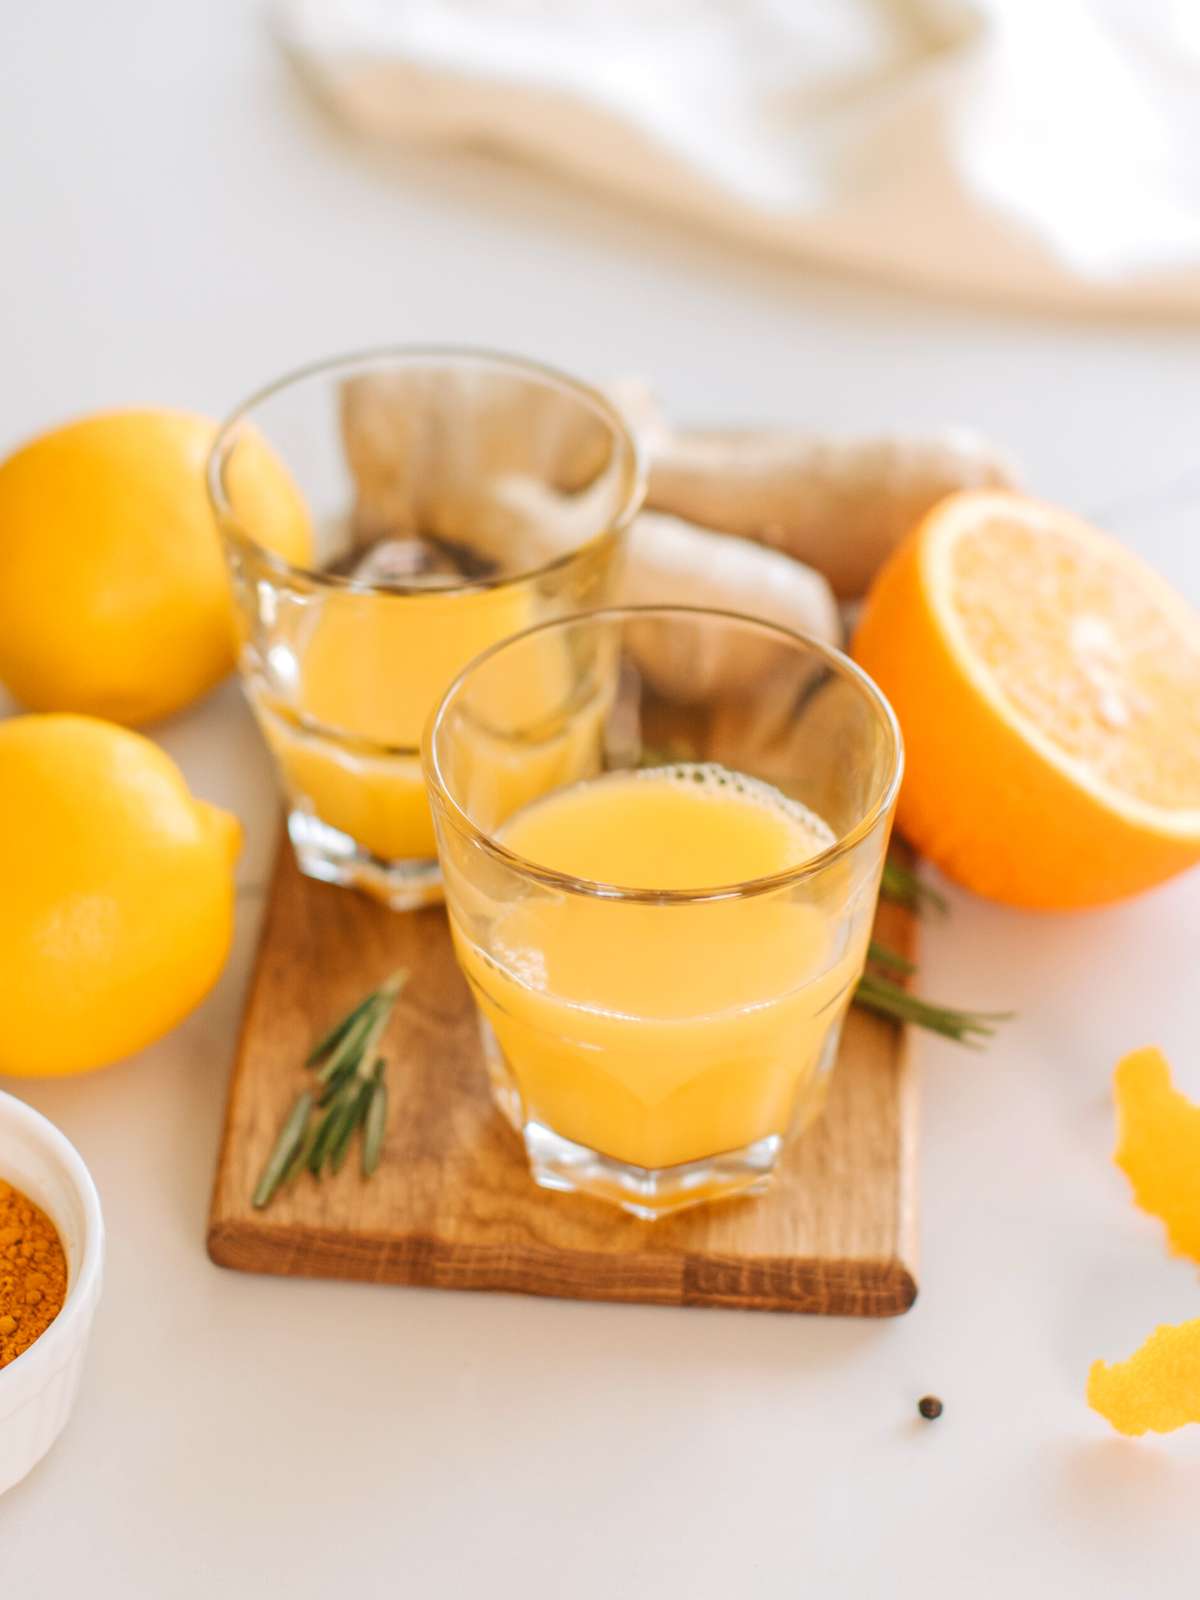 Two small glasses of ginger shots on a cutting board with various ingredients scattered around.